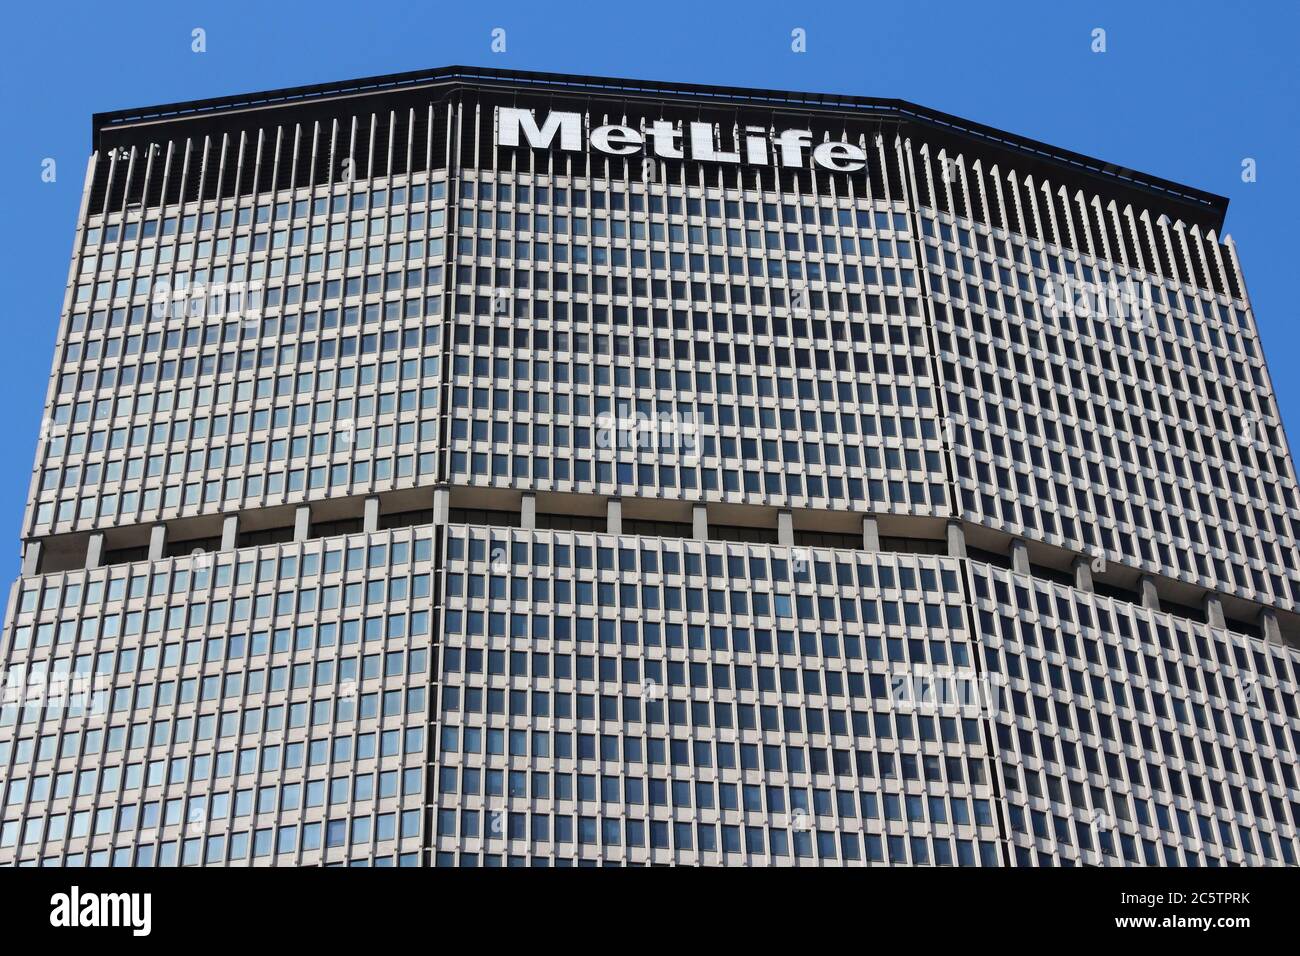 NEW YORK, USA - JULY 3, 2013: MetLife Building exterior in Park Avenue, New York. MetLife Building is the headquarters for MetLife insurance company. Stock Photo